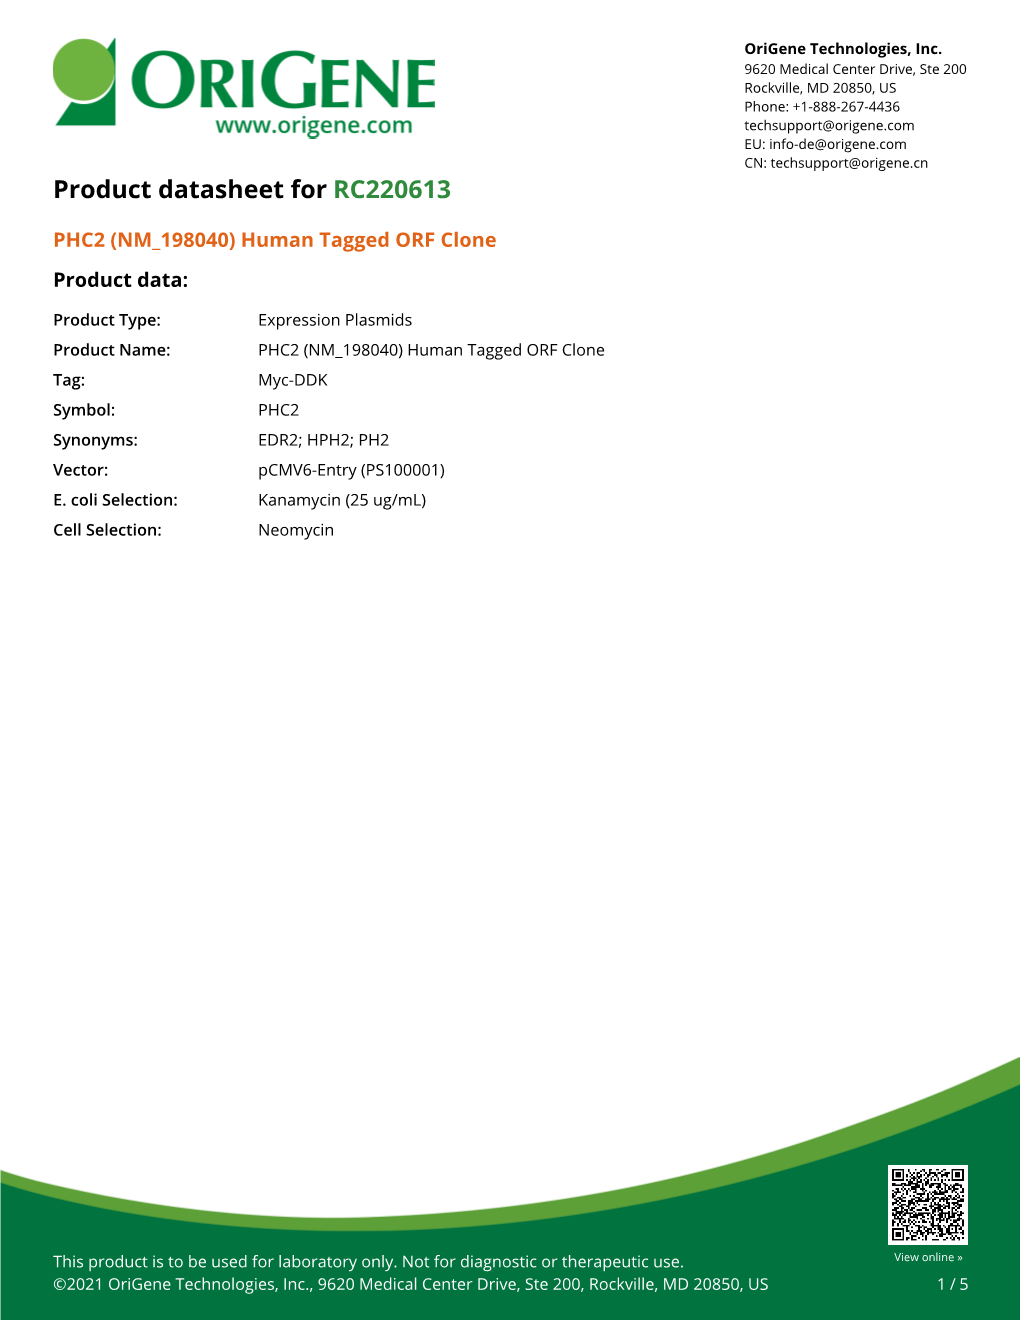 PHC2 (NM 198040) Human Tagged ORF Clone Product Data